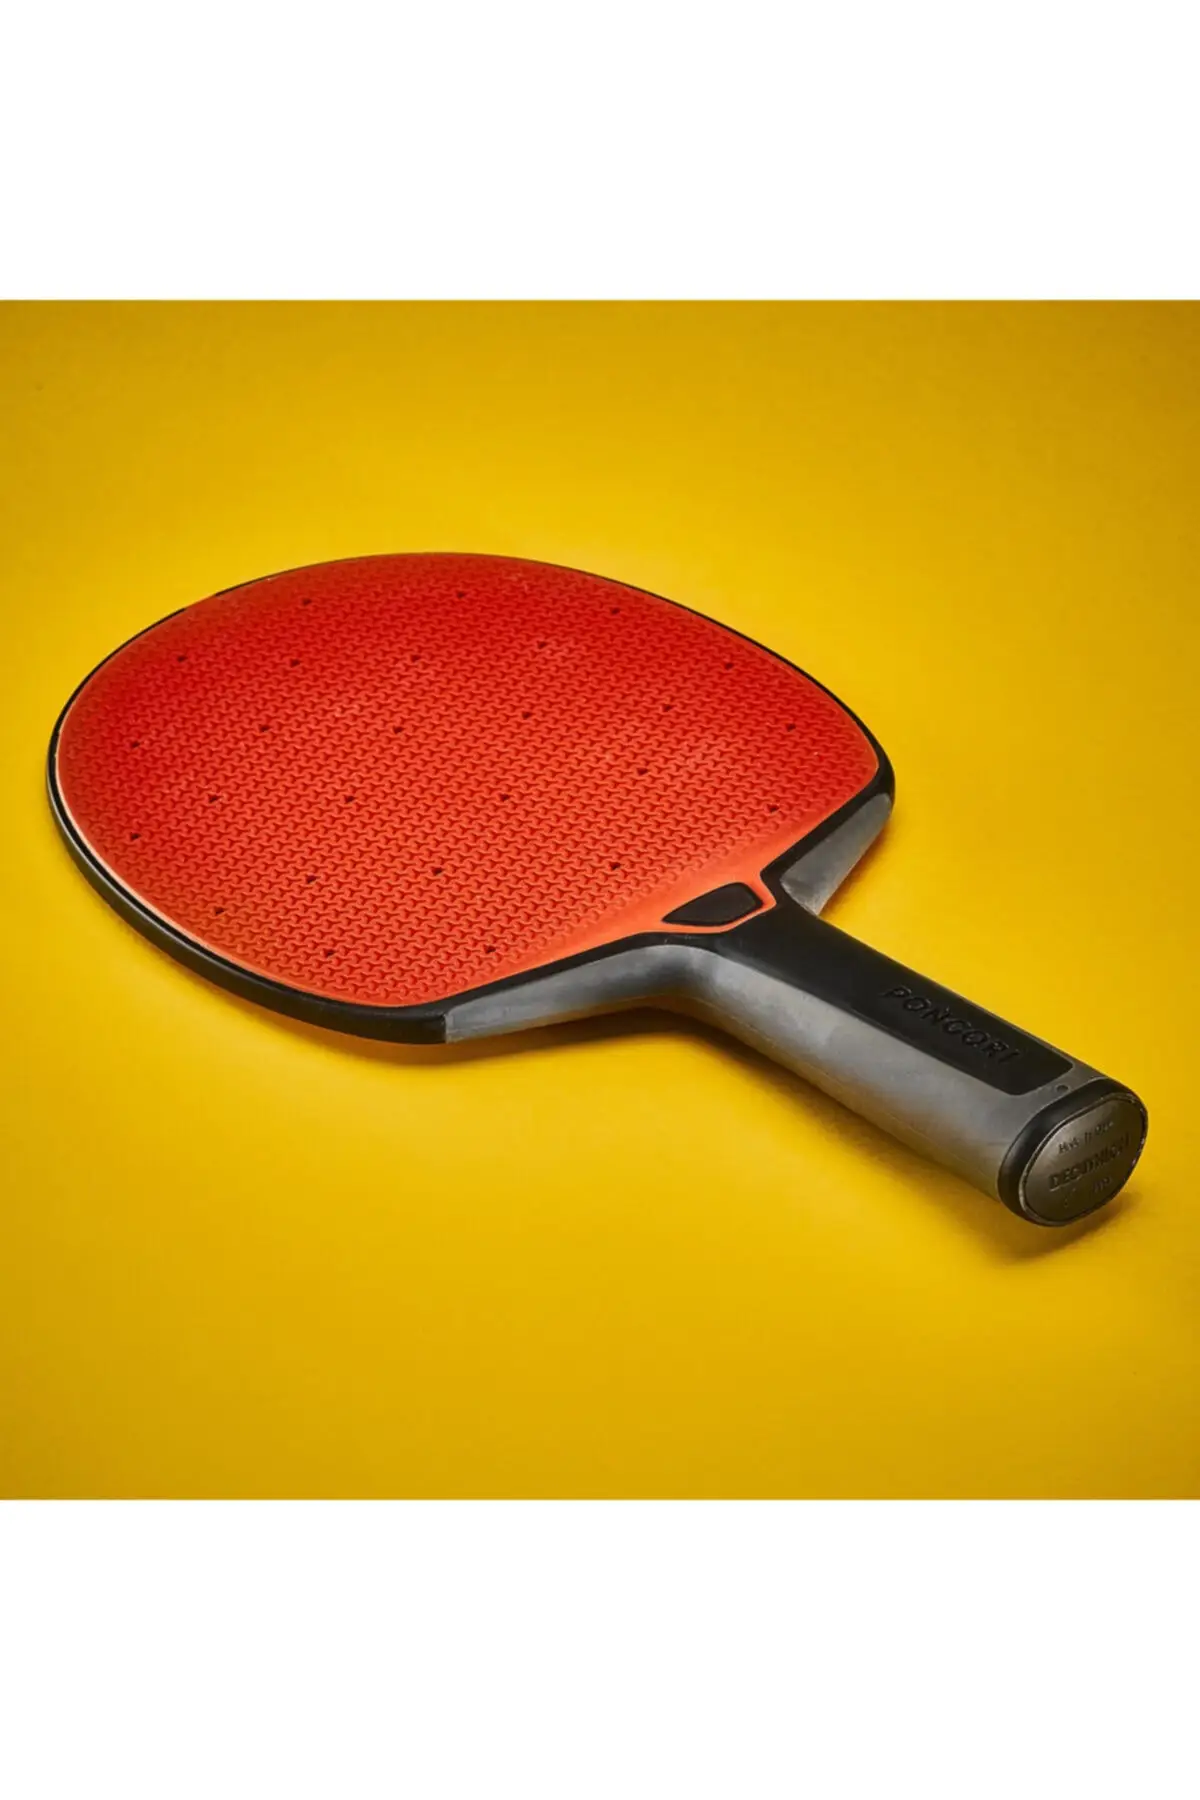 

Cn trade table tennis tennis equipment & accessory sports Outdoor